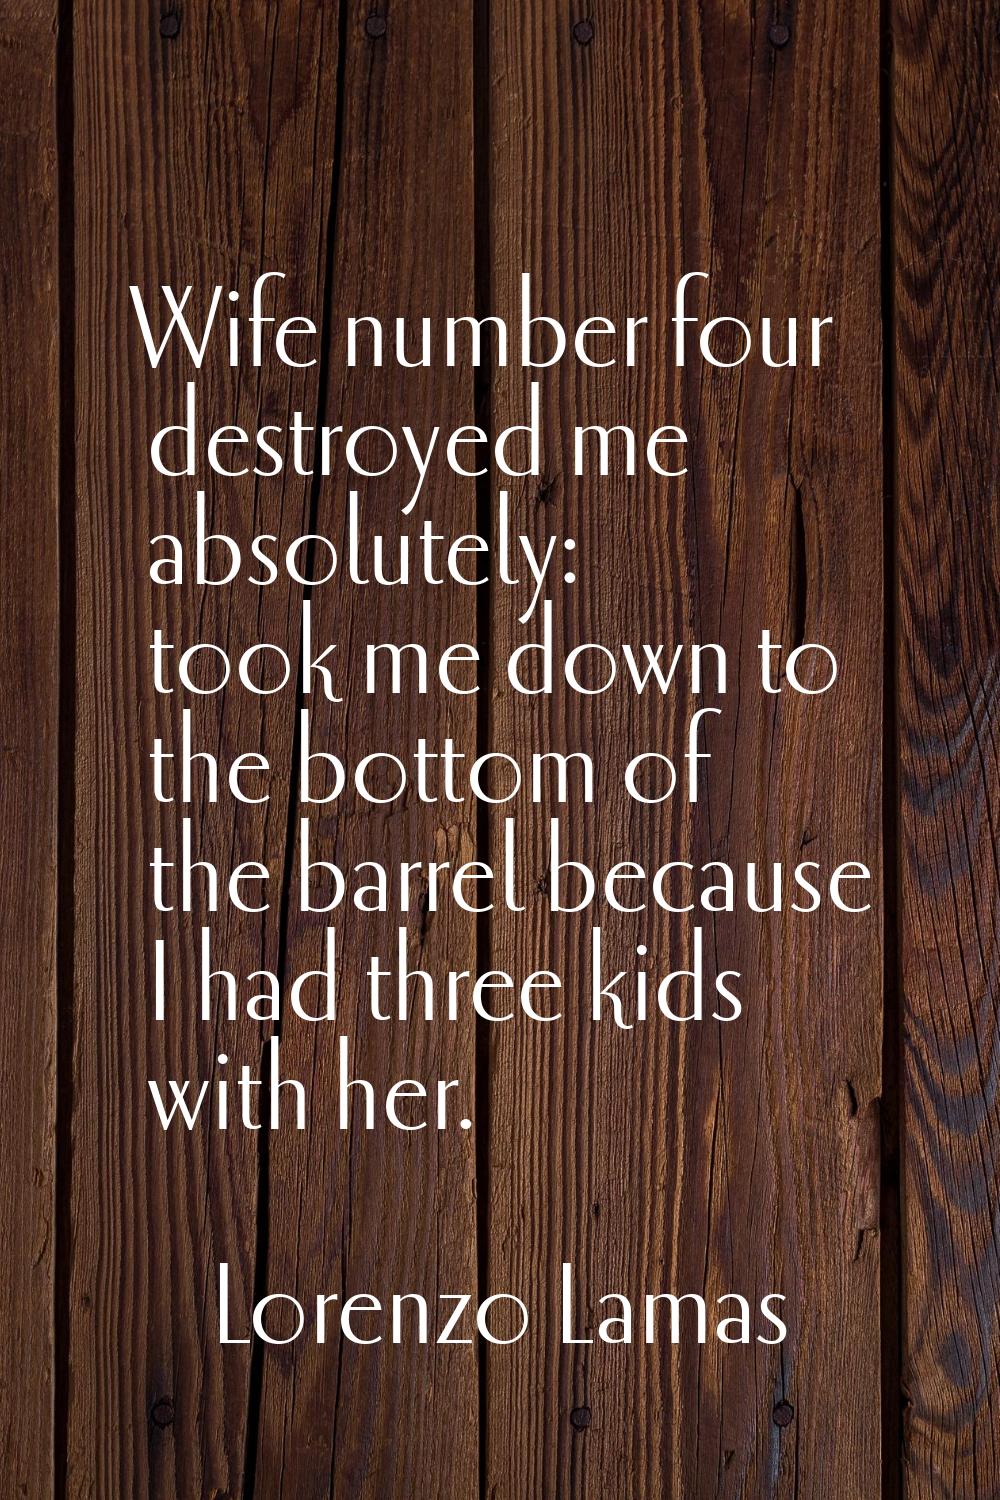 Wife number four destroyed me absolutely: took me down to the bottom of the barrel because I had th